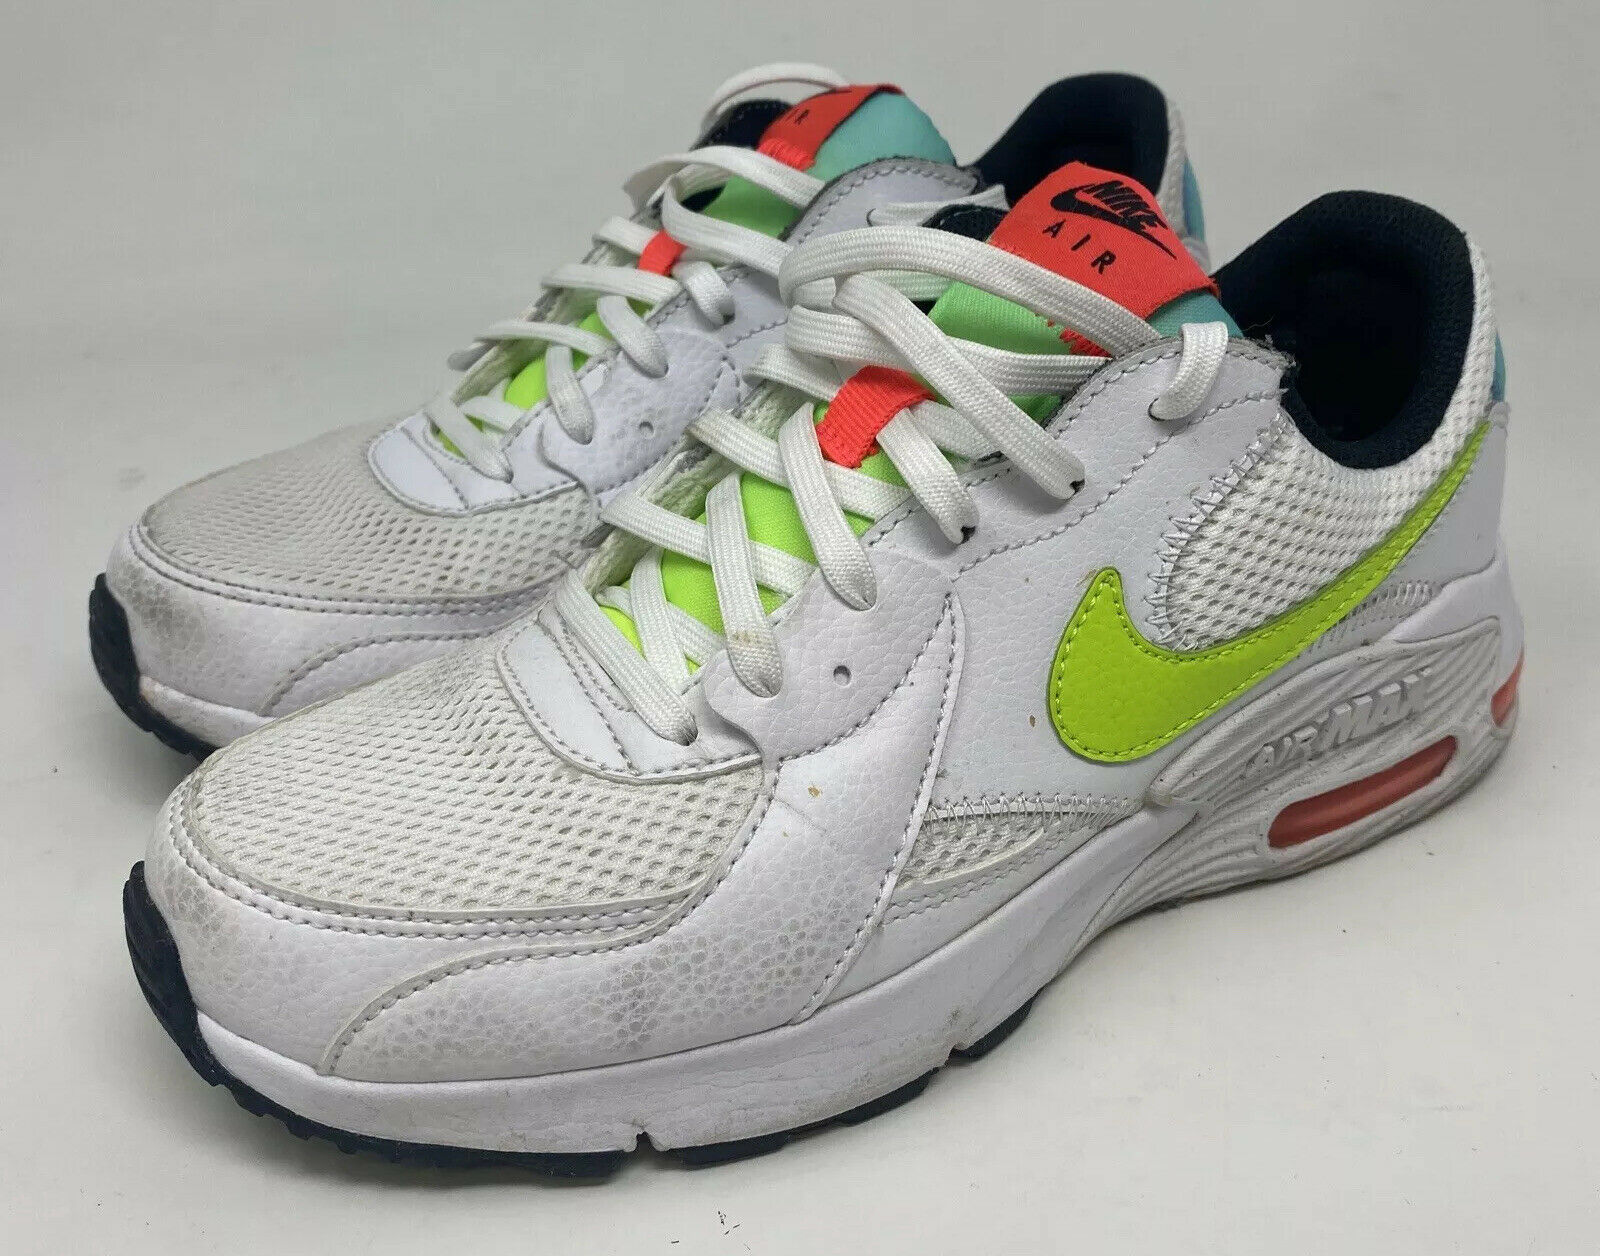 Nike Women’s Air Max Excee Shoes White Volt Black Red CW 5606-100 Size 7.5